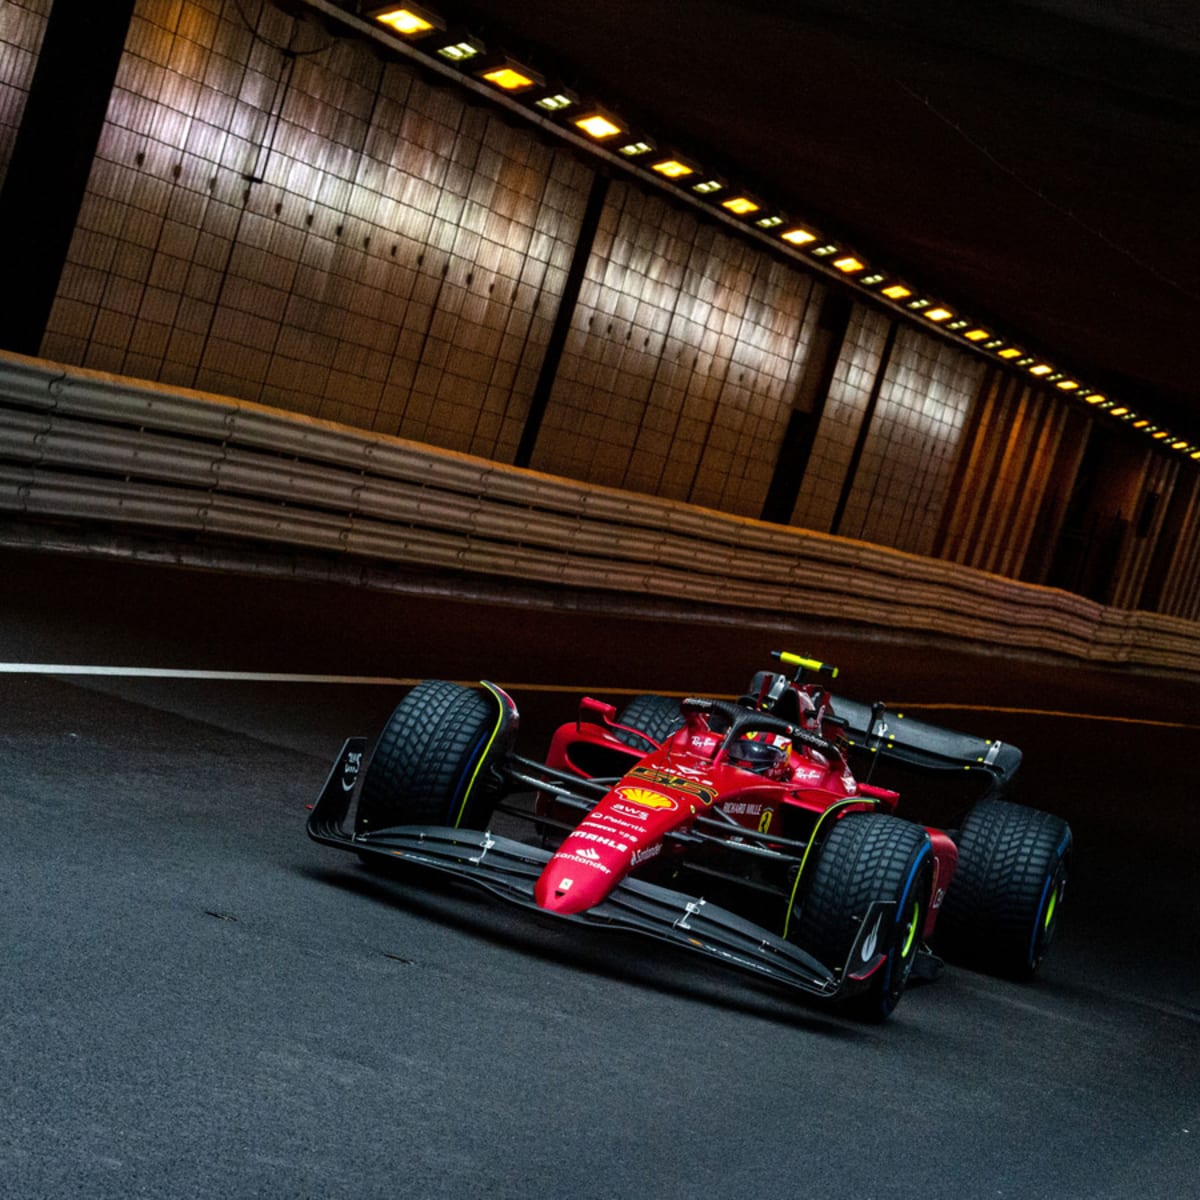 F1 News Huge Changes Coming To Monaco Grand Prix That Fans Will Love